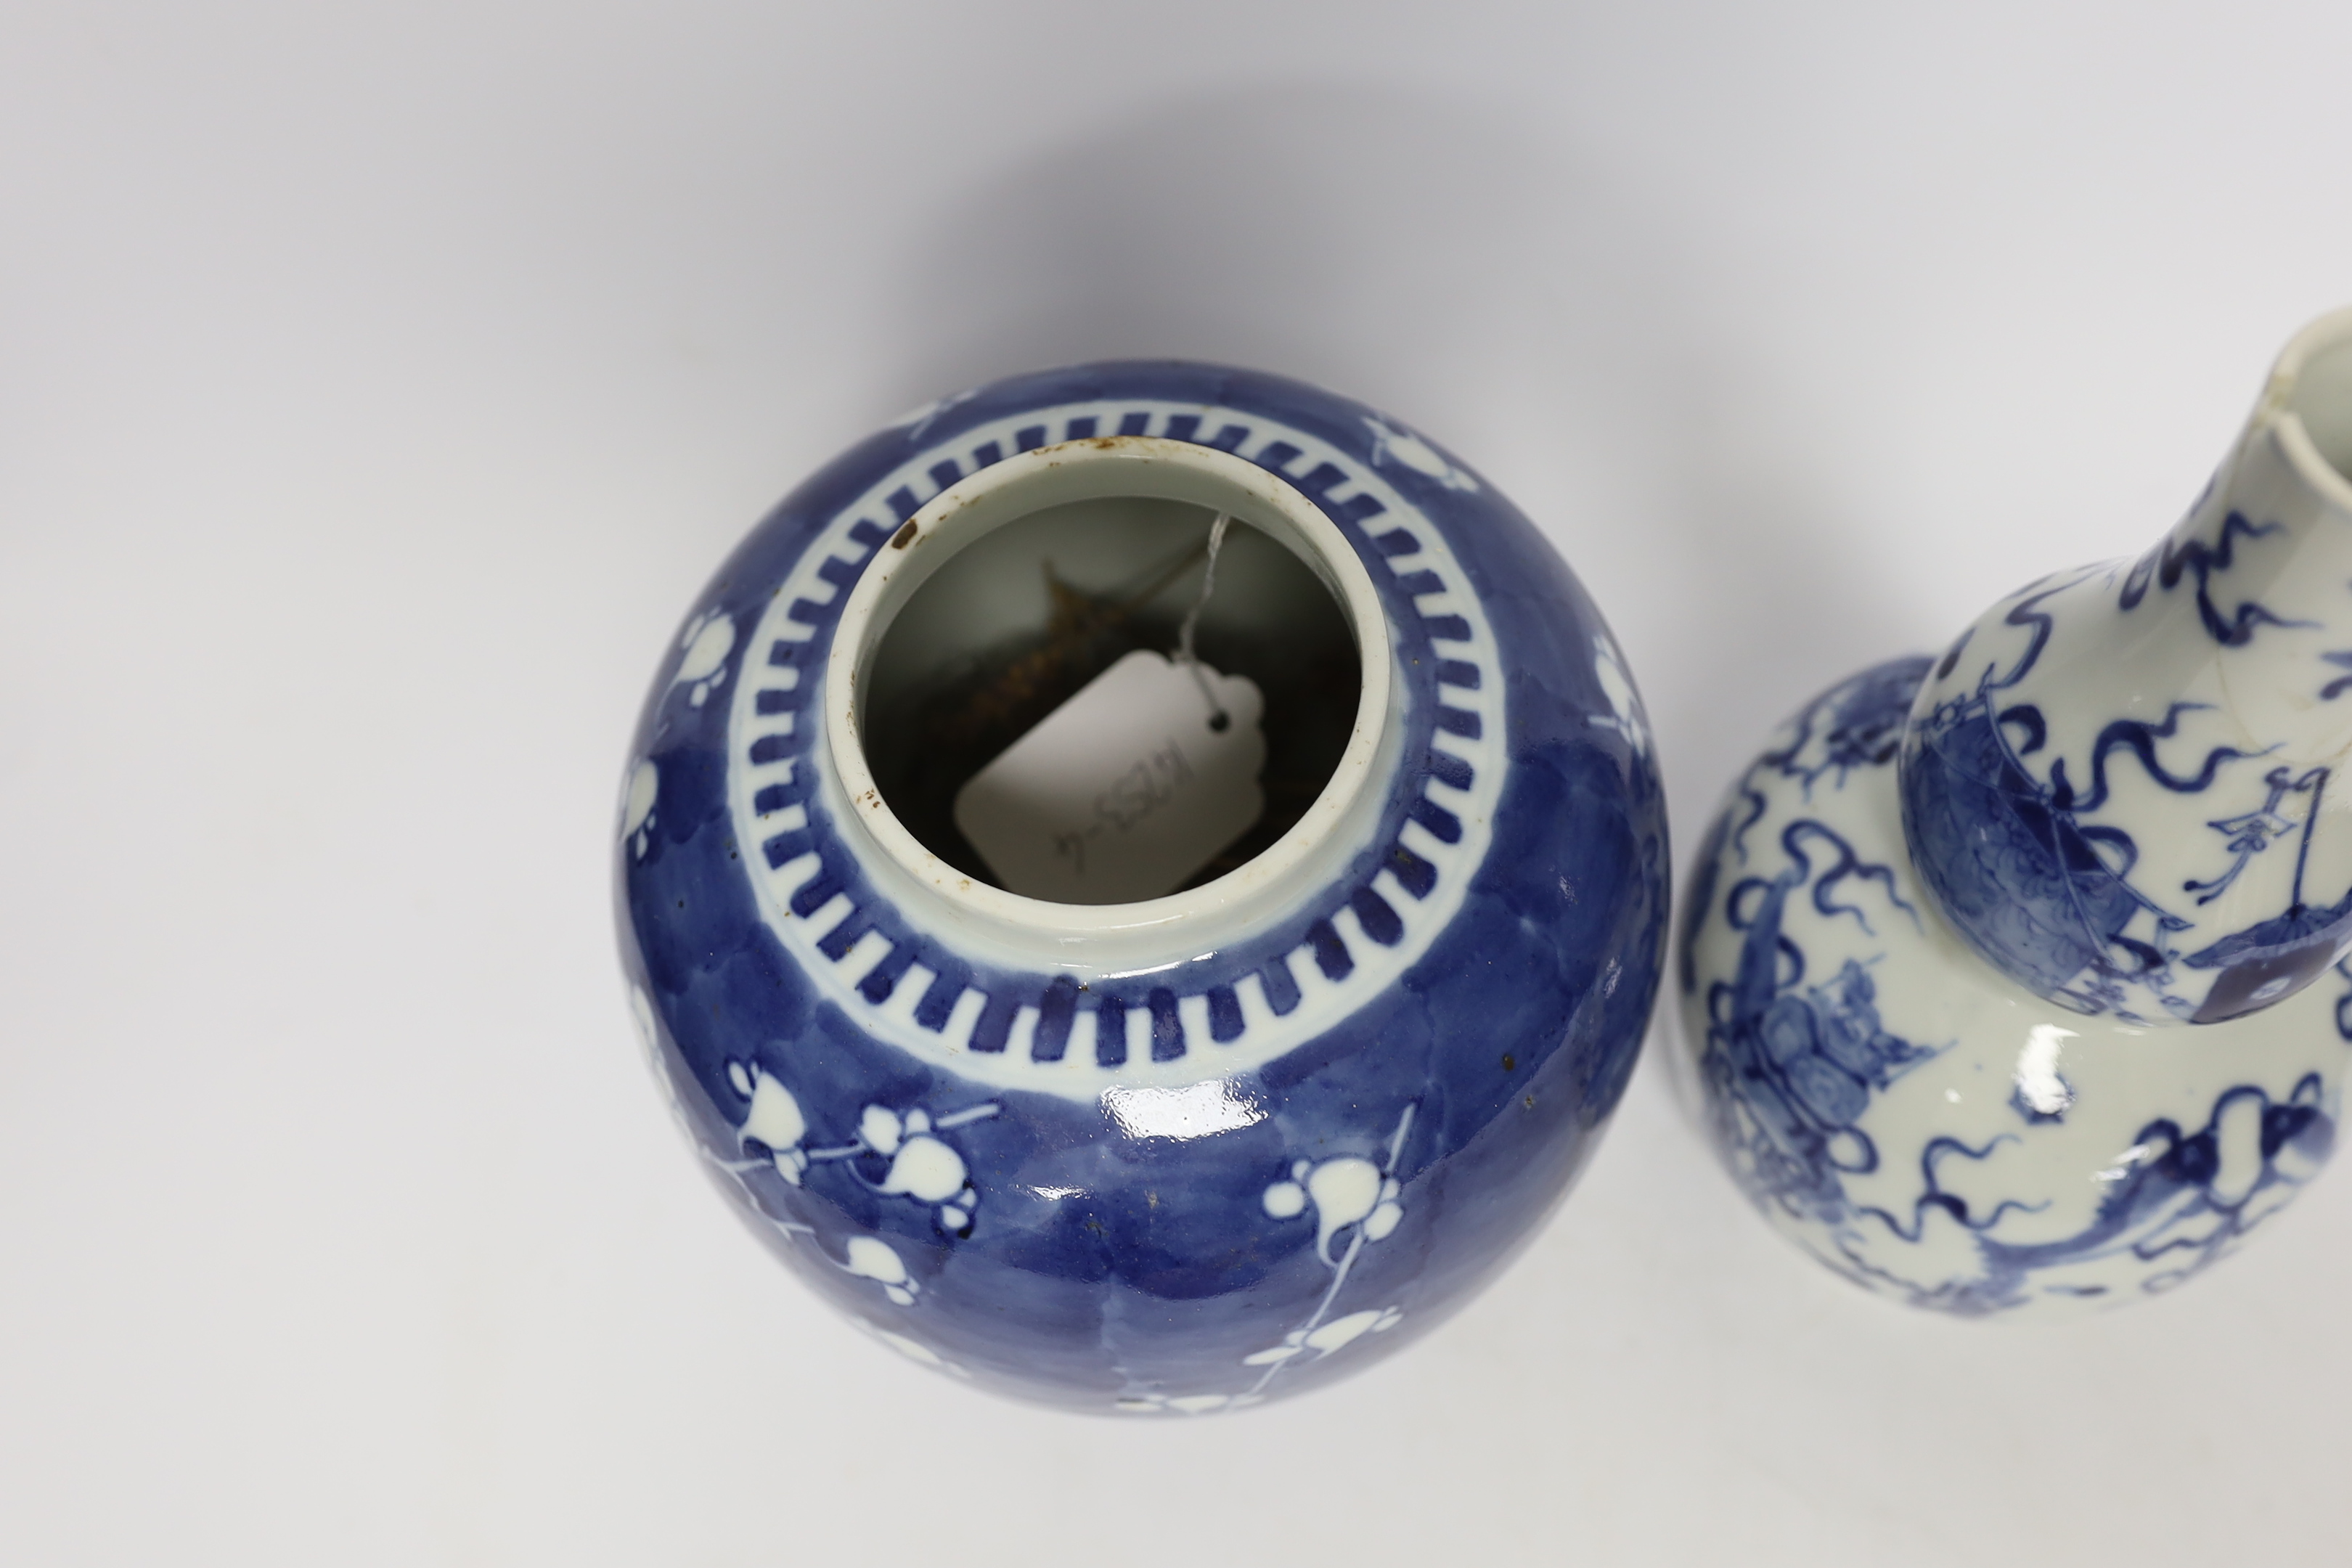 A Chinese blue and white prunus jar and cover and a double gourd vase, late 19th/early20th century, tallest 23cm